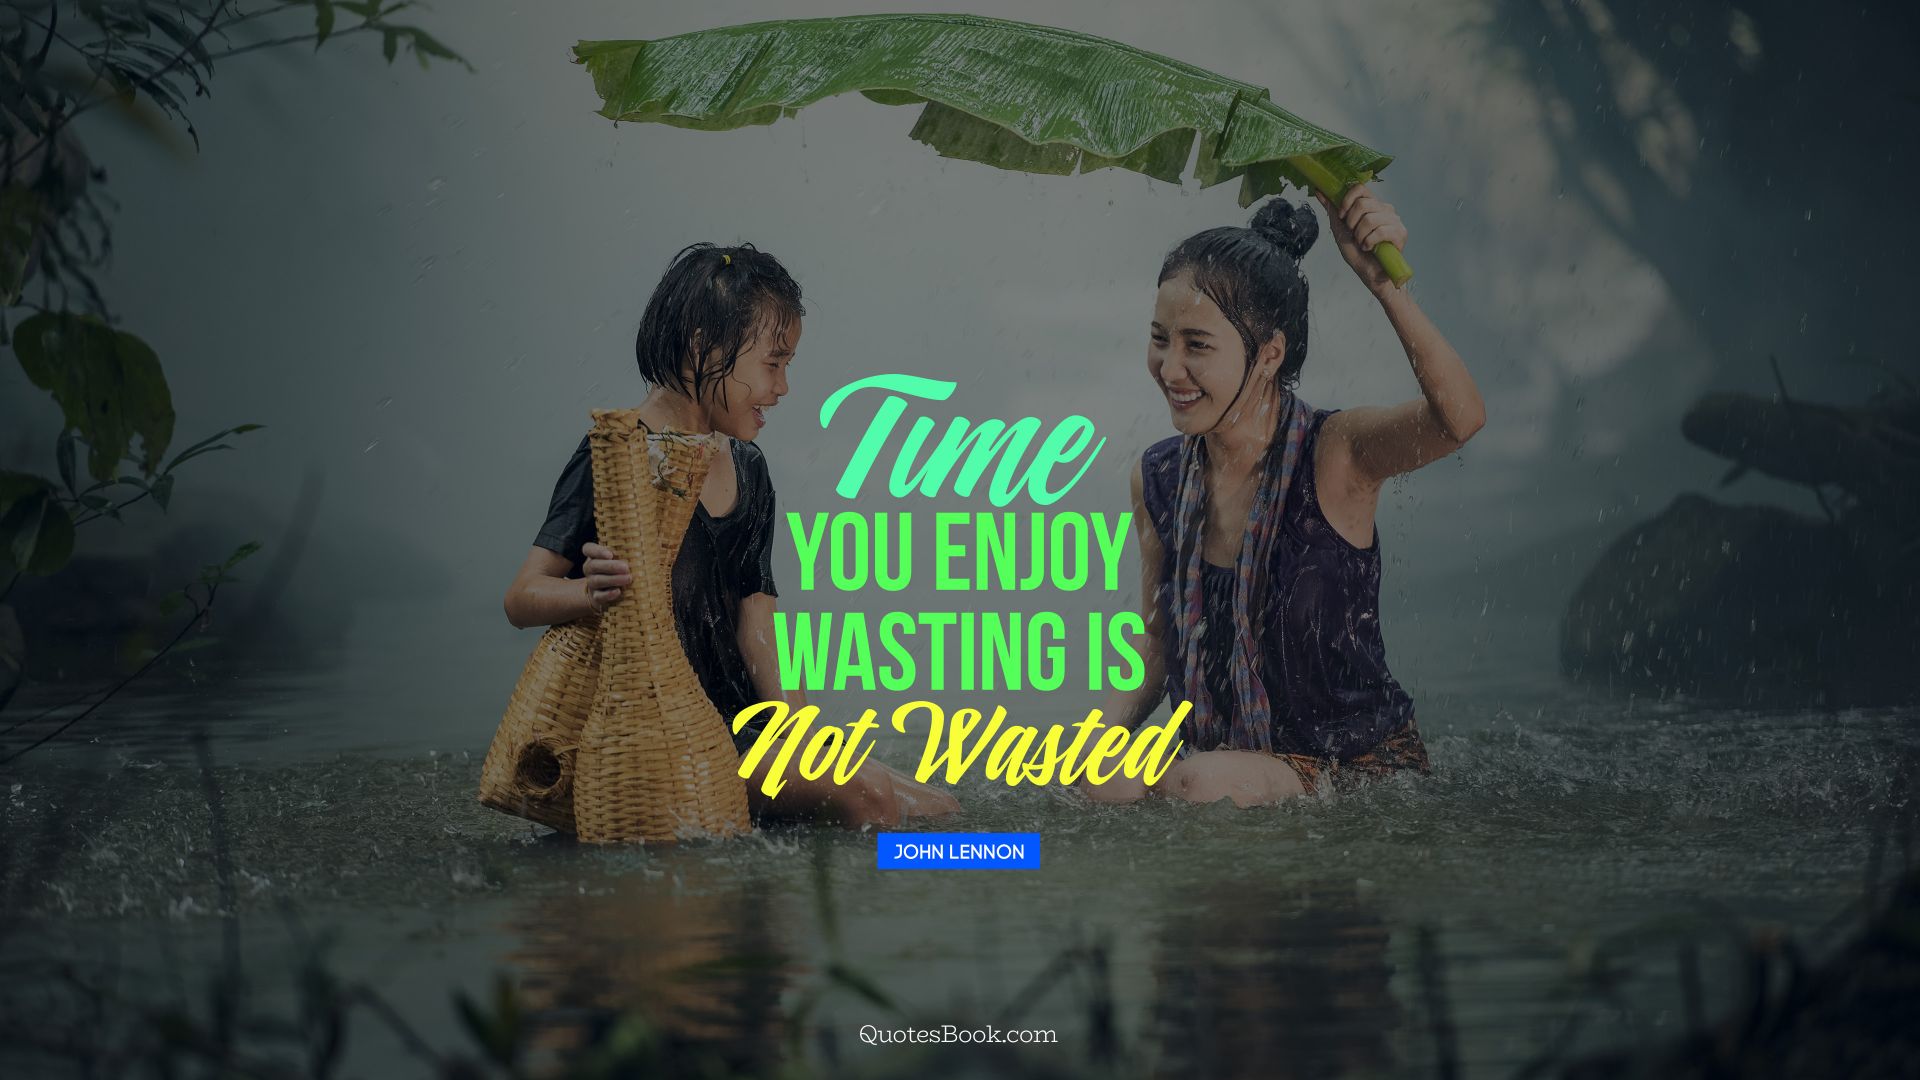 Time you enjoy wasting is not wasted. - Quote by John Lennon